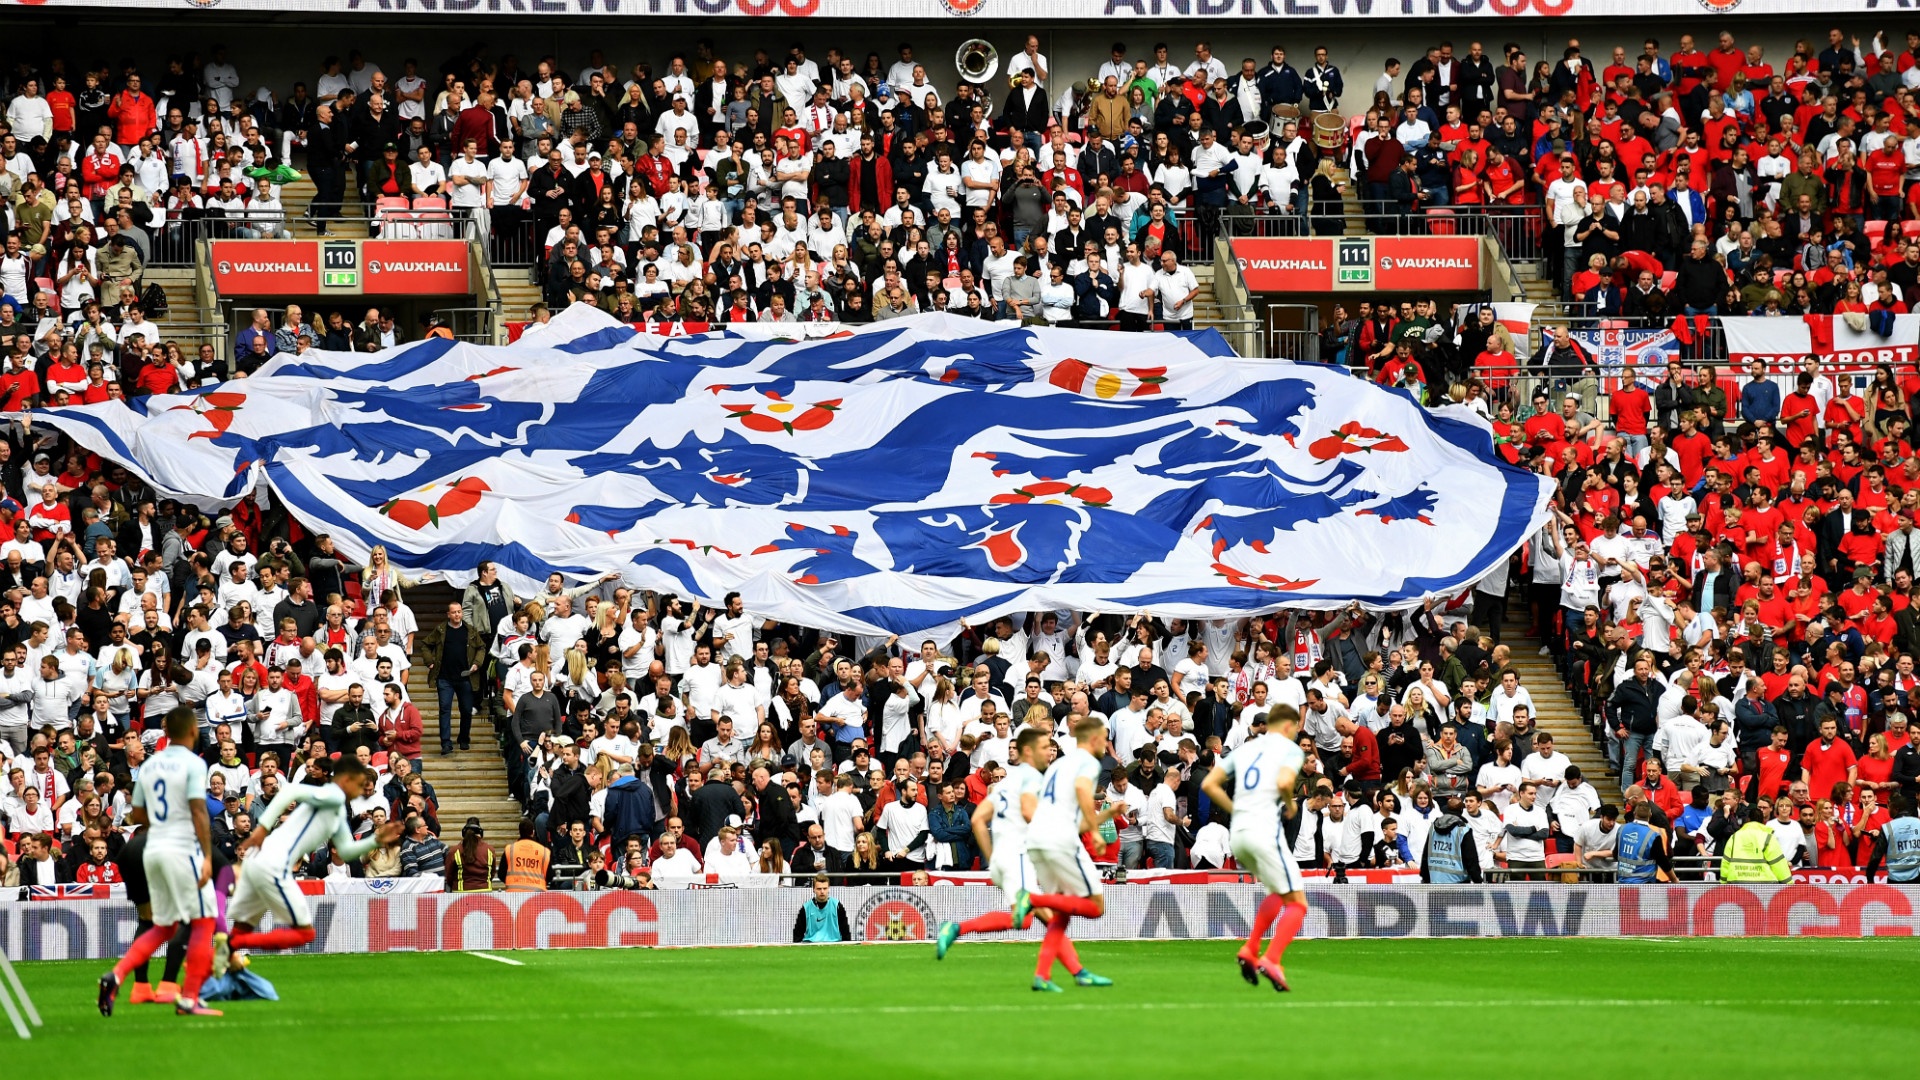 FA chairman Greg Clarke has confirmed that a tribute will be held at Wembley.